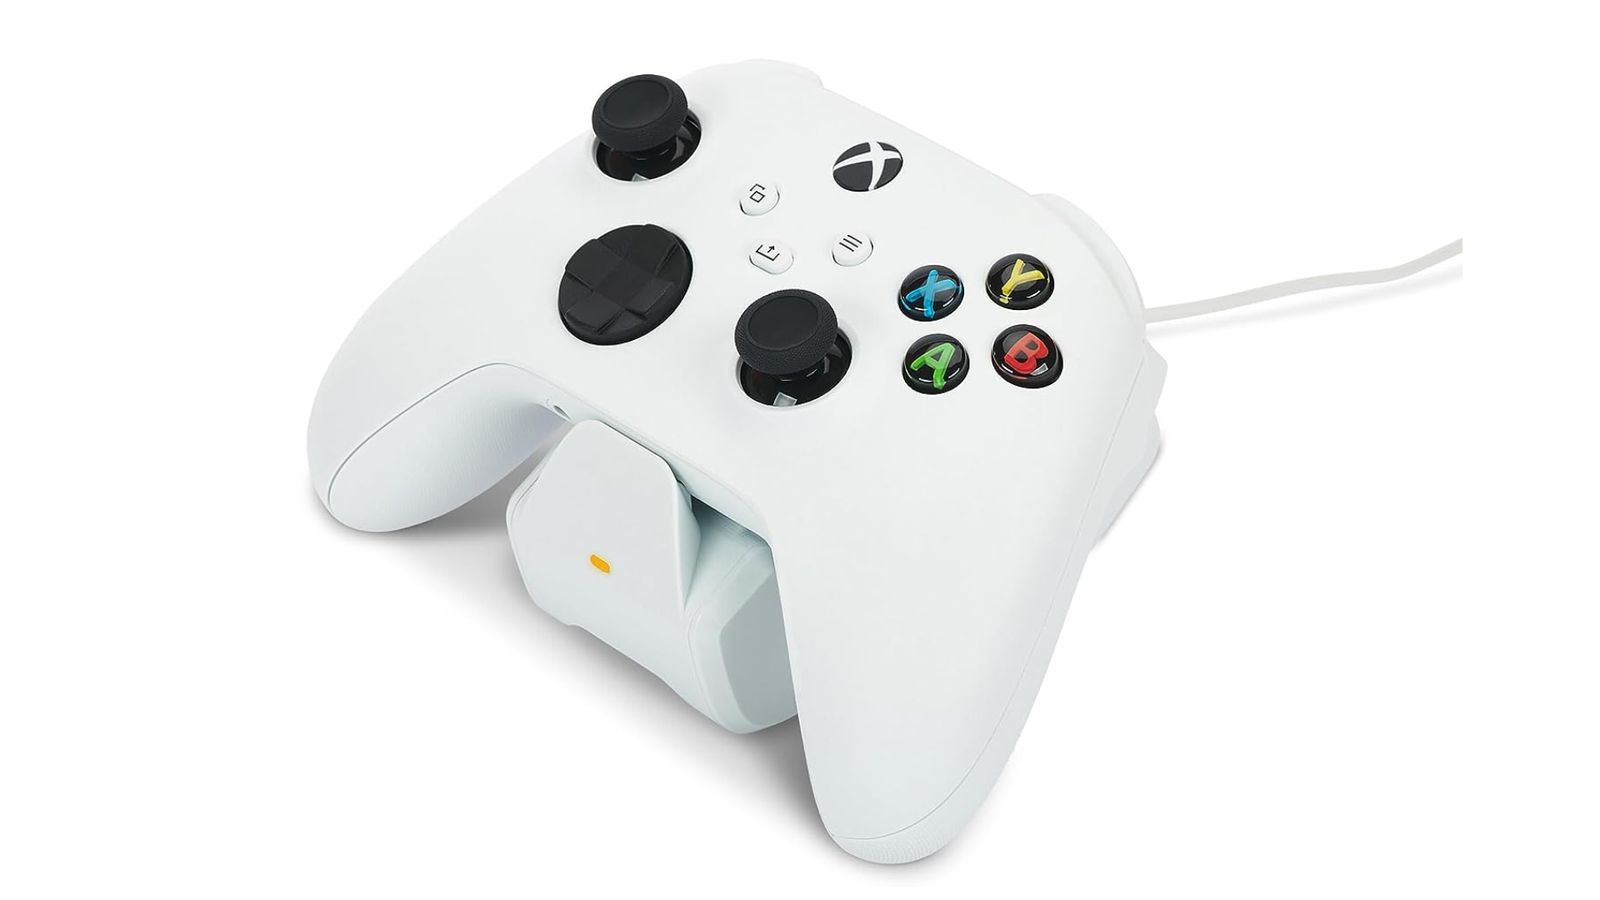 PowerA Charging Station product image of a white Xbox controller connected to a white charing stand.